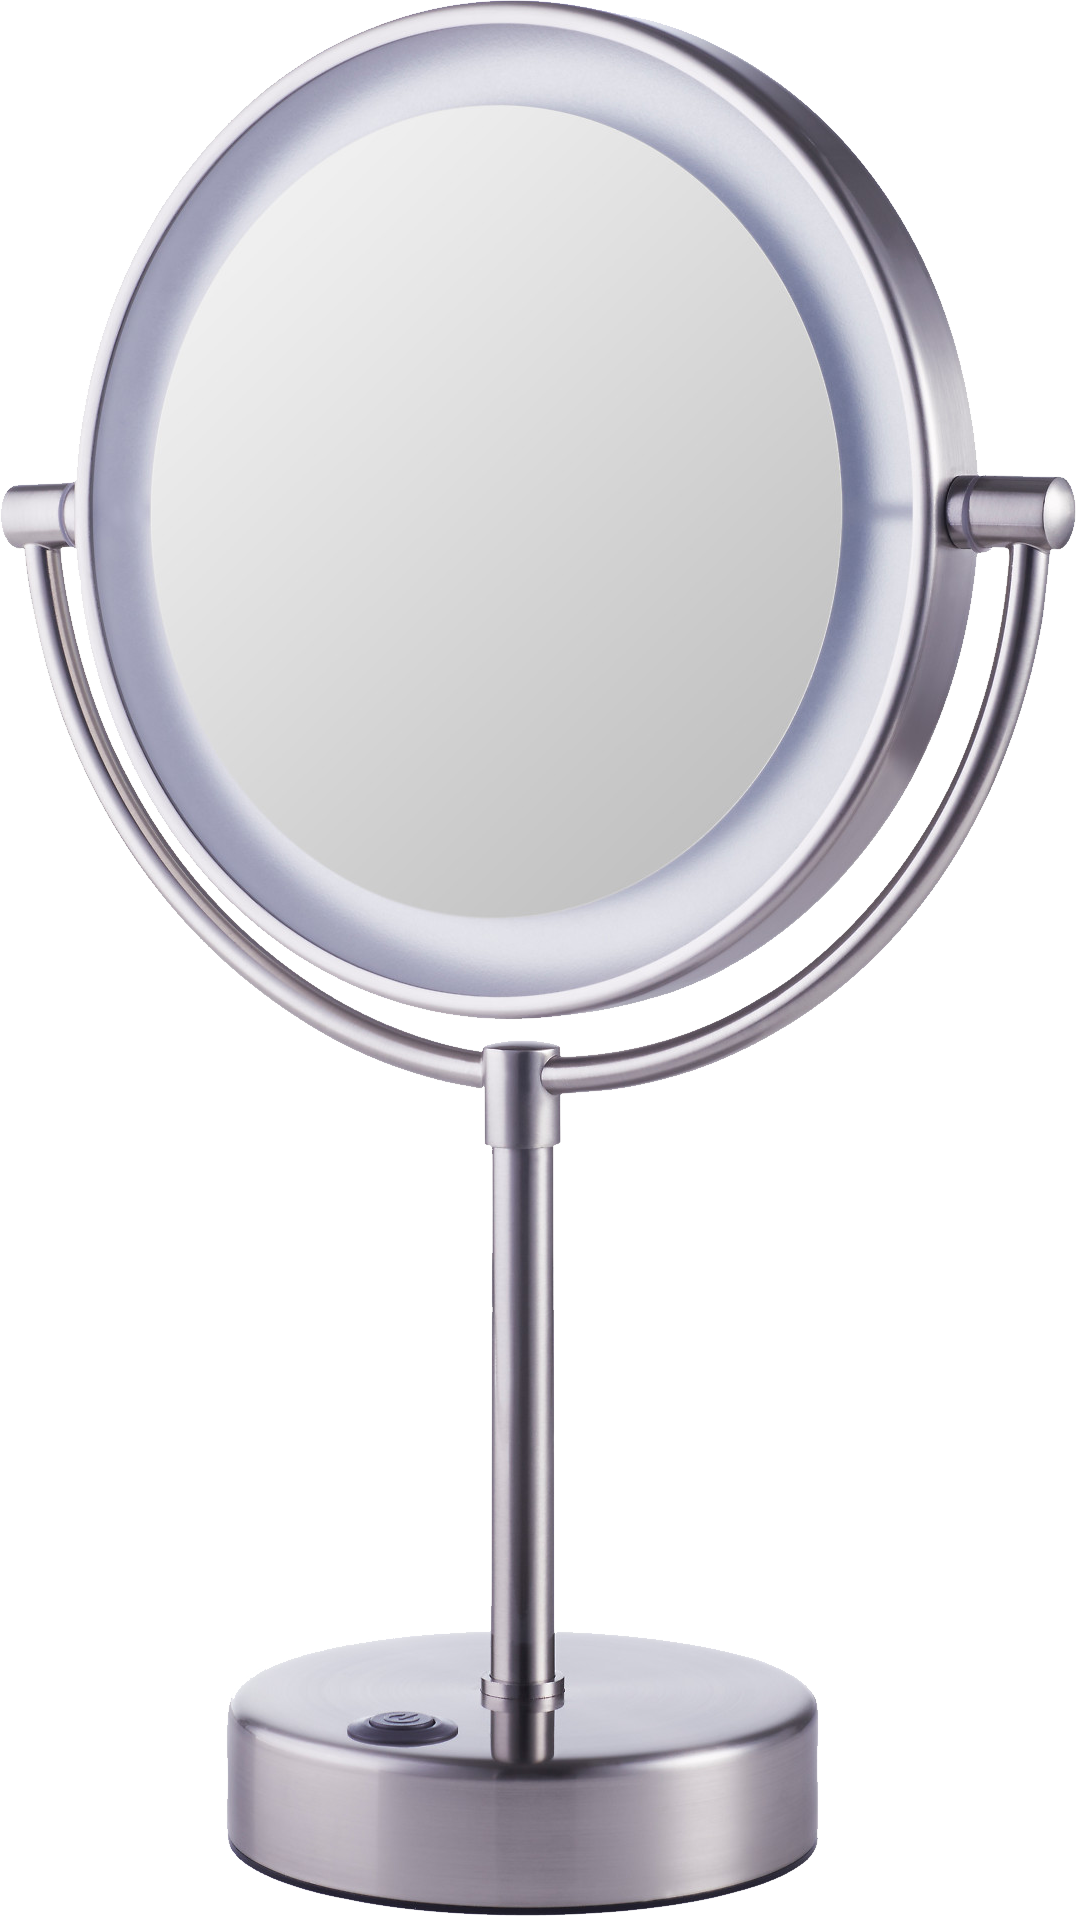 Mirror Clipart Black And White Transparent Background - Download free mirror png images. - Kremi Png